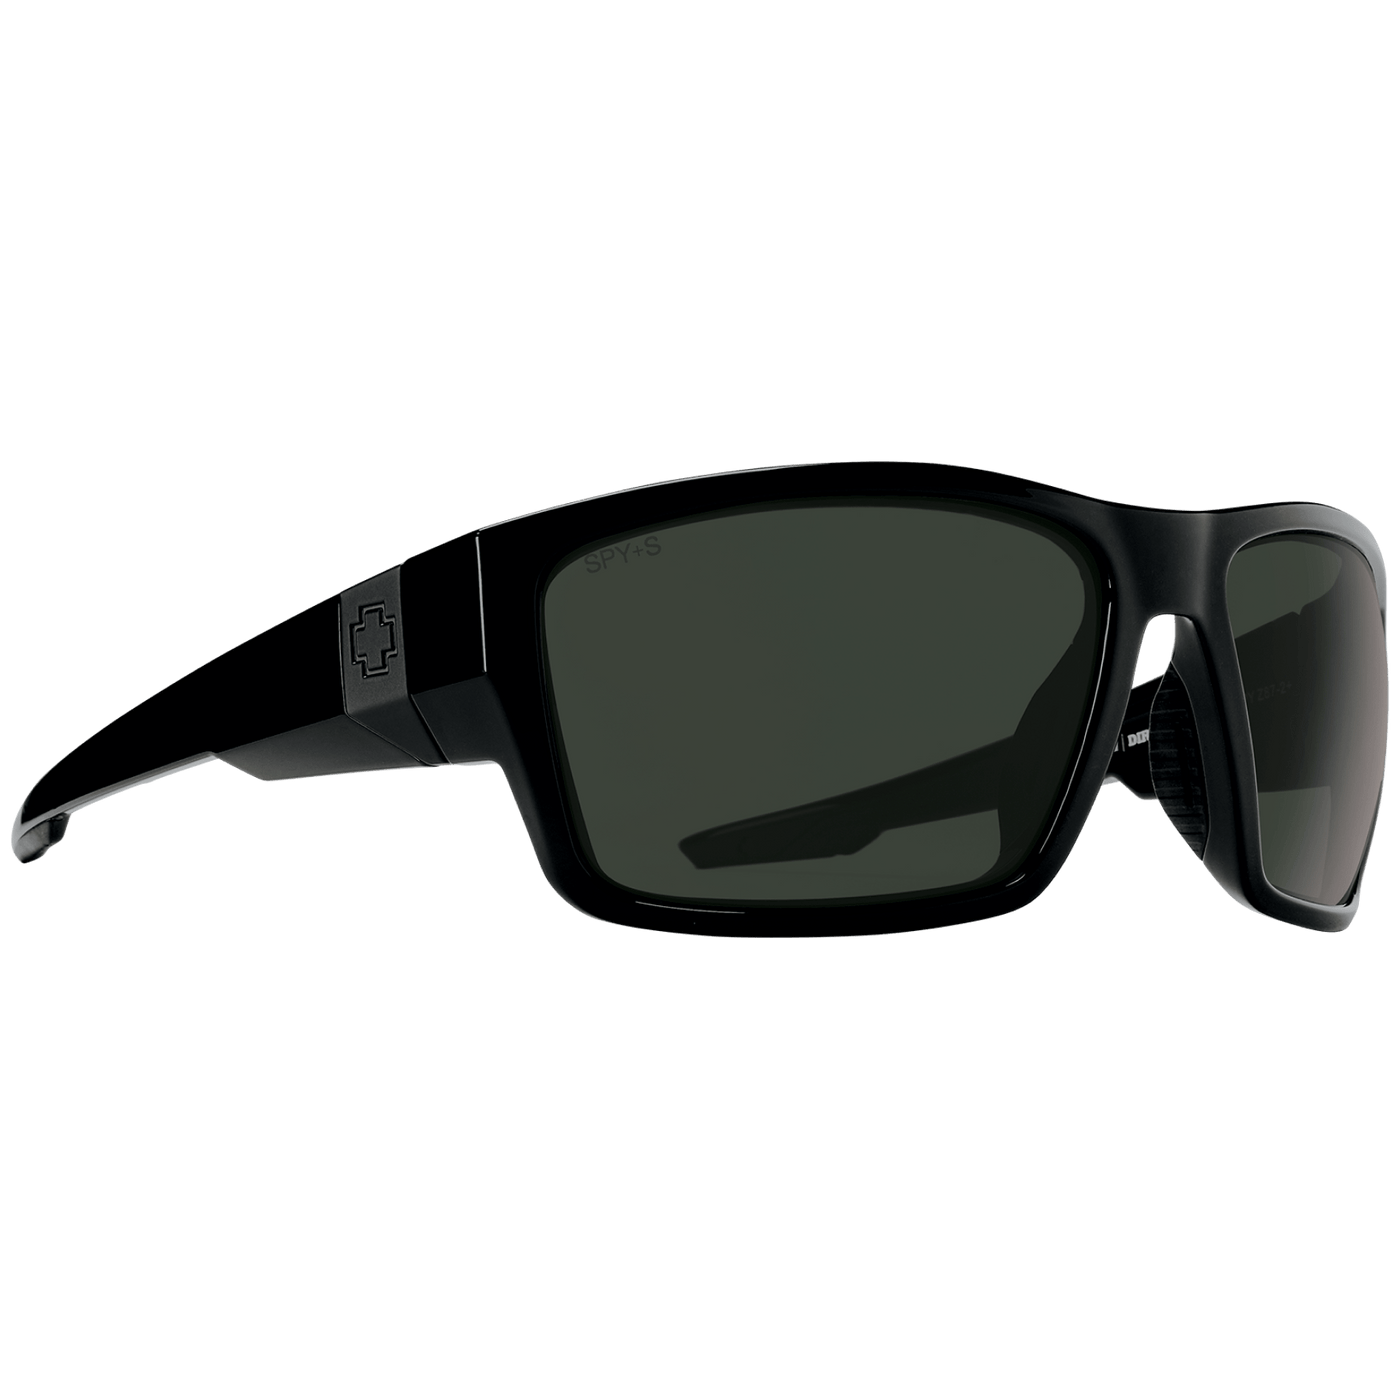 SPY DIRTY MO TECH ANSI Approved Sunglasses - Black 8Lines Shop - Fast Shipping